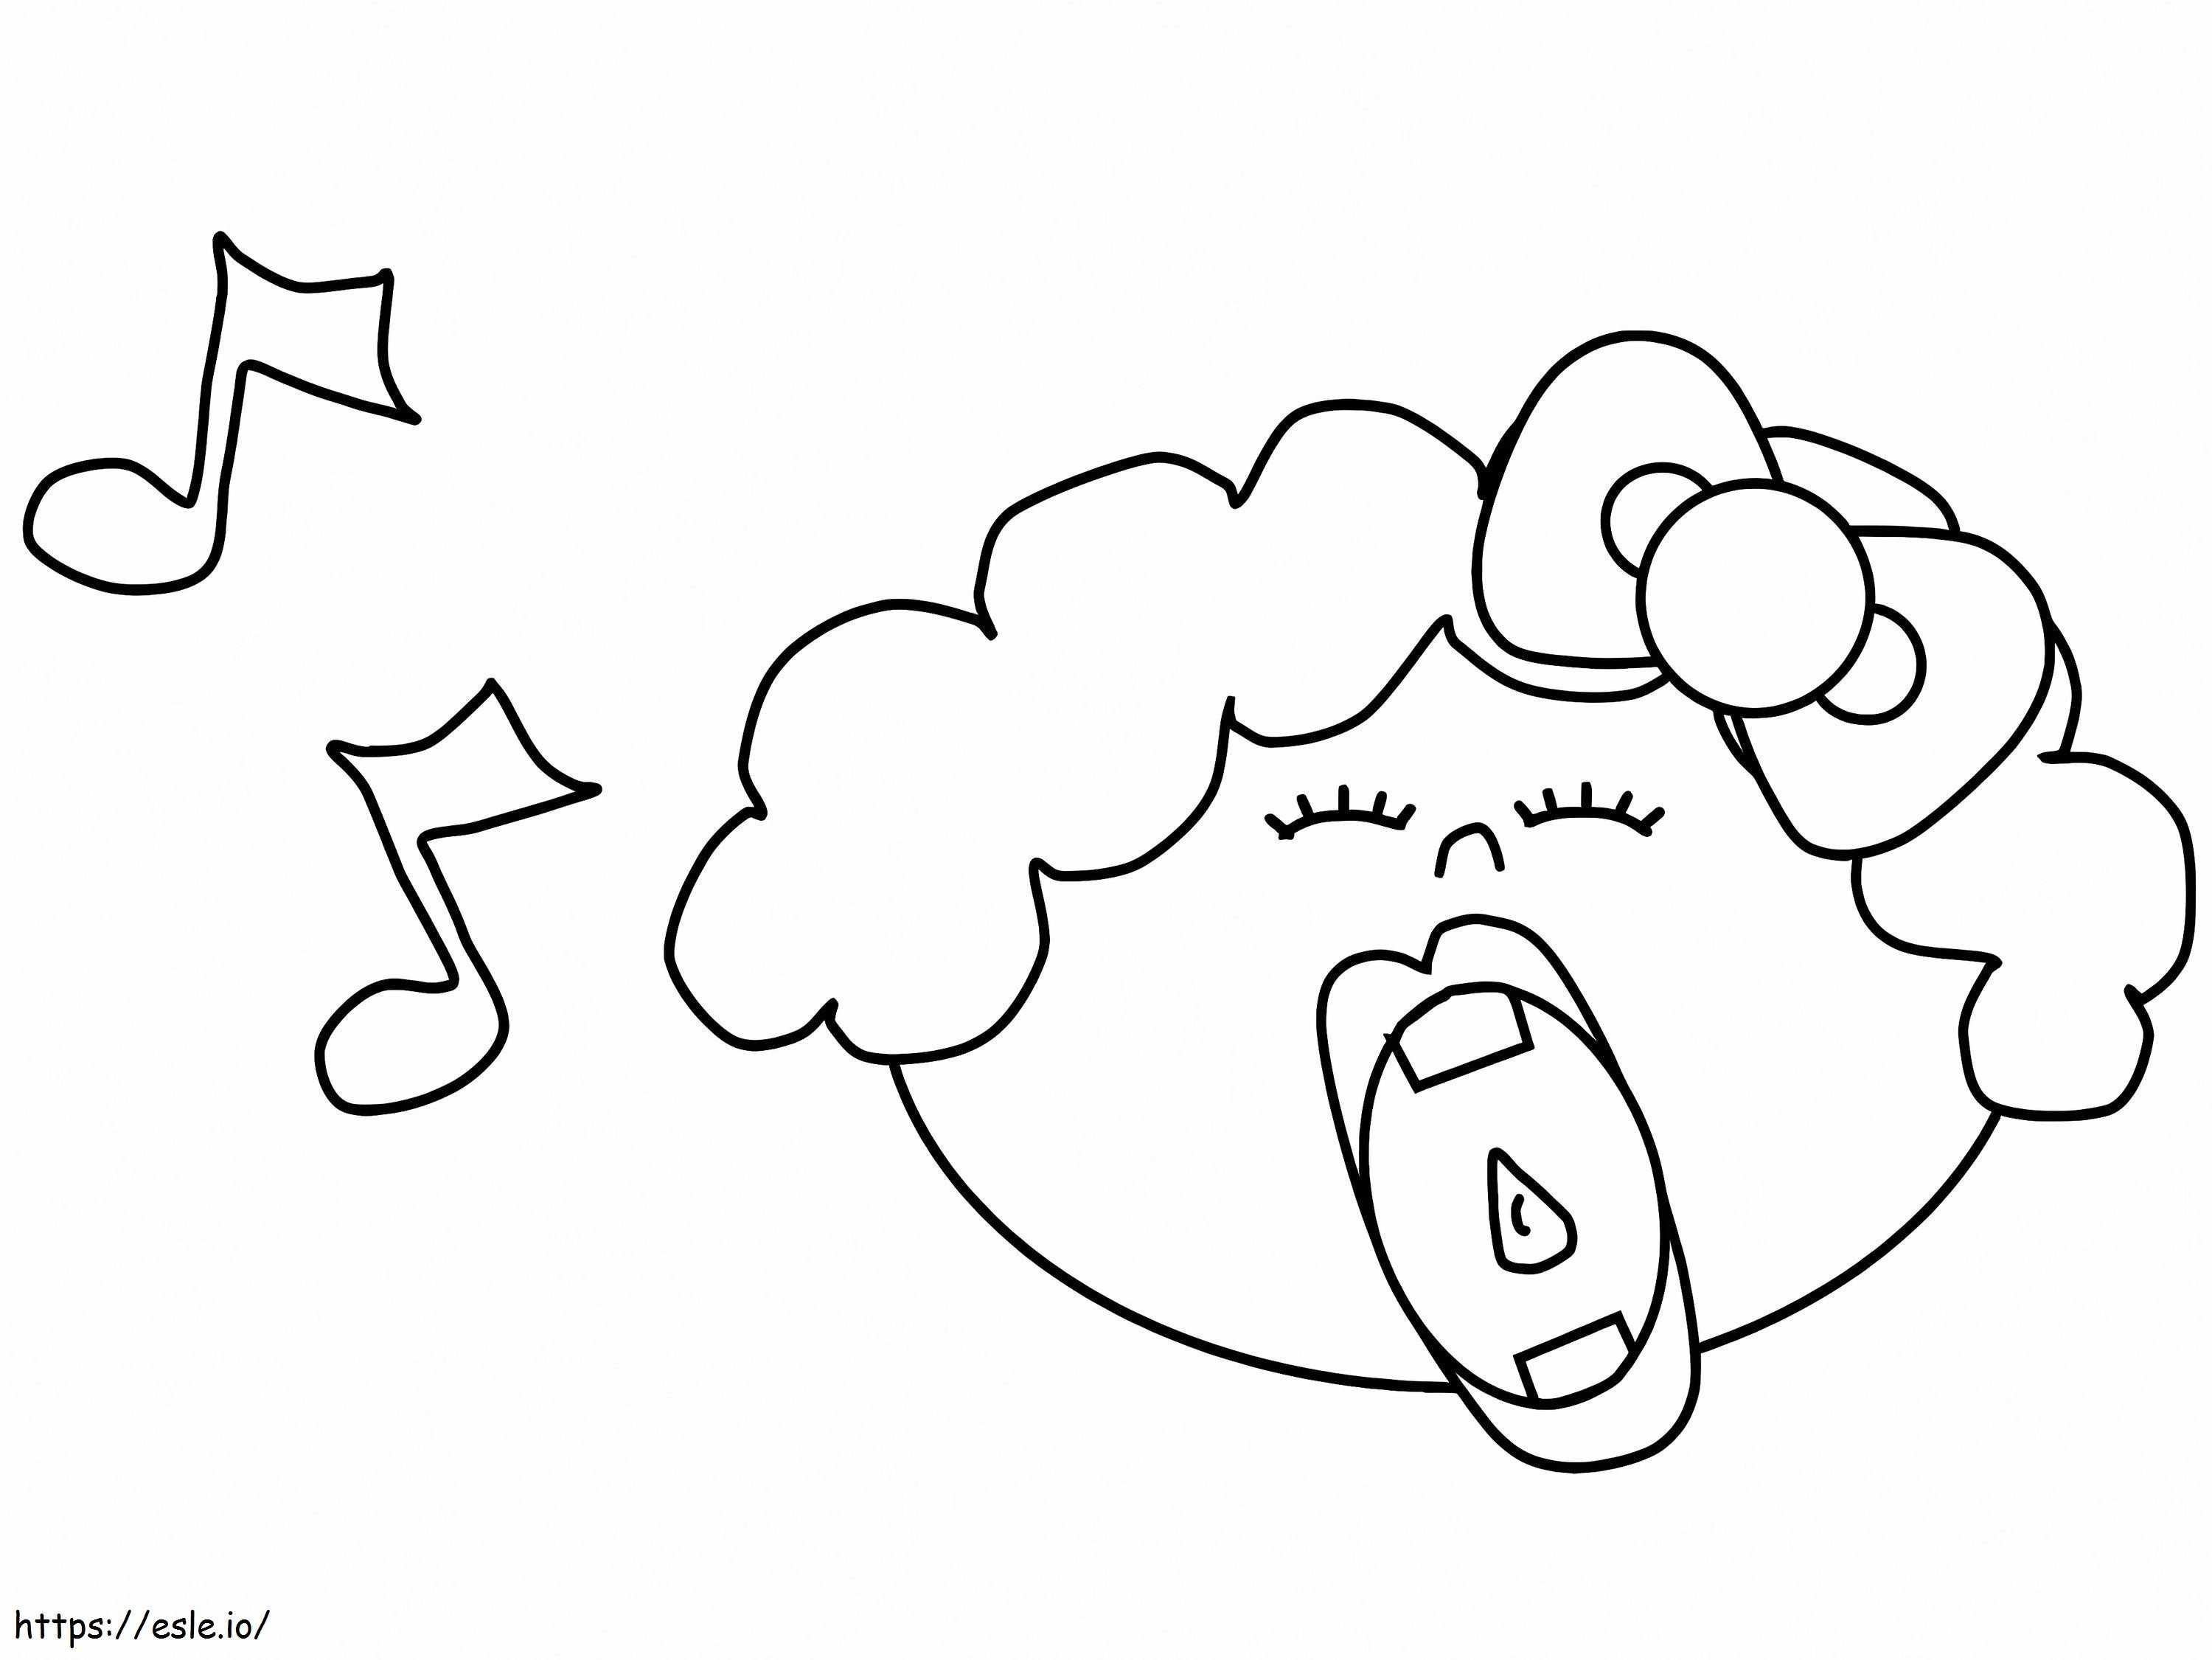 Singer Face coloring page